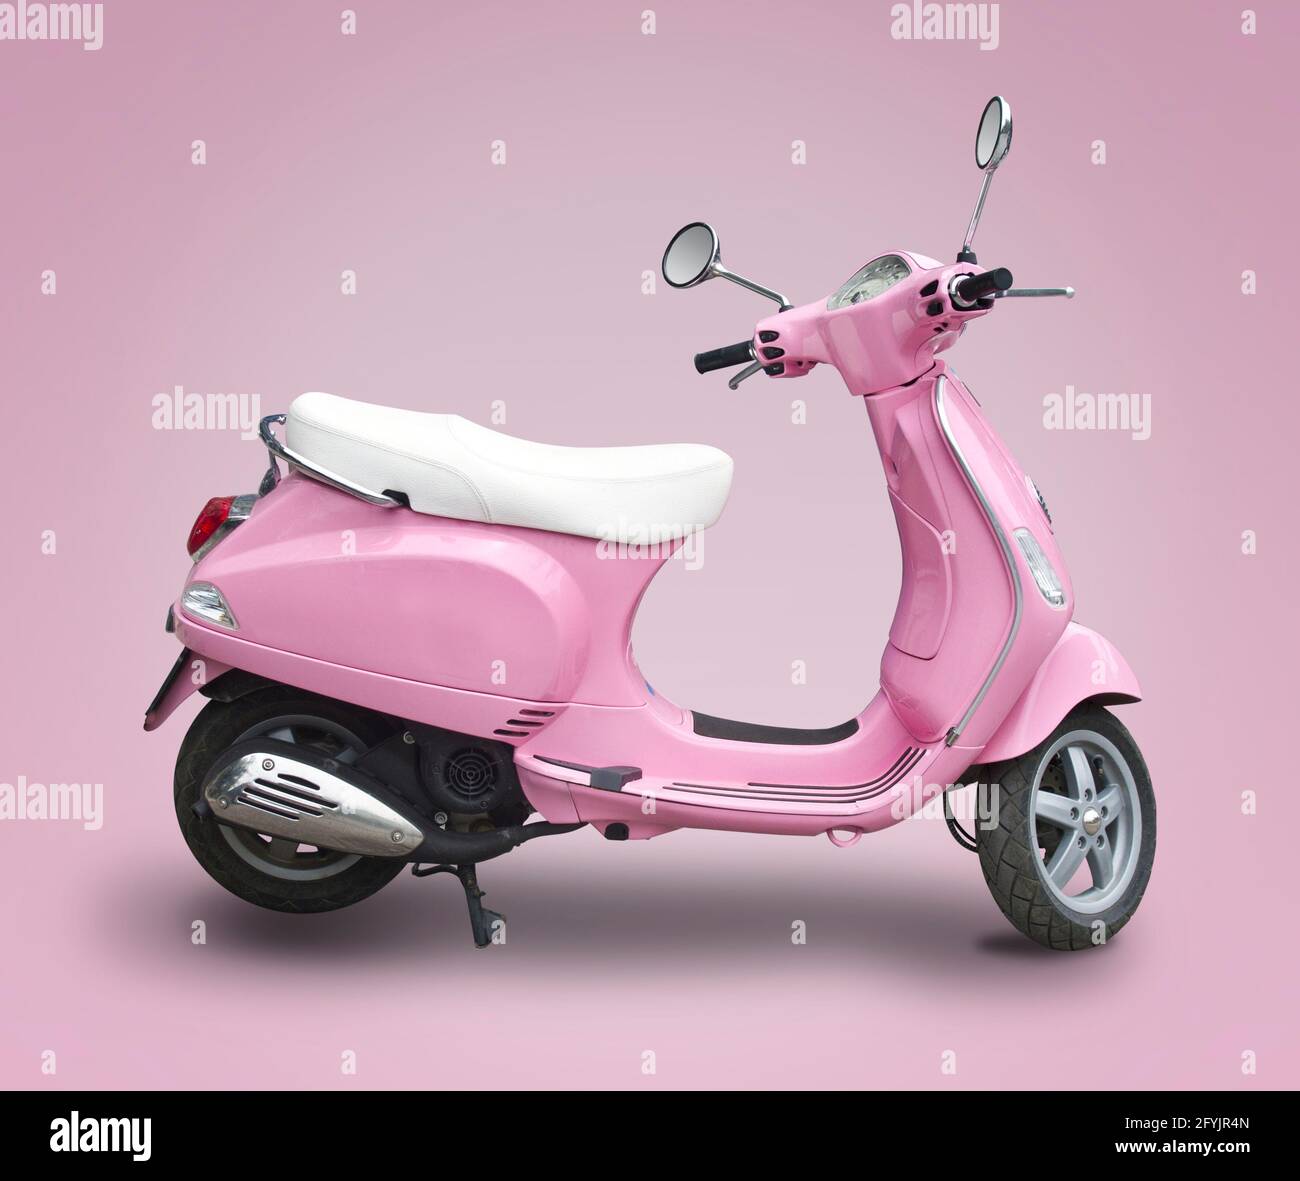 Pink Vespa isolated on pink background Stock Photo - Alamy